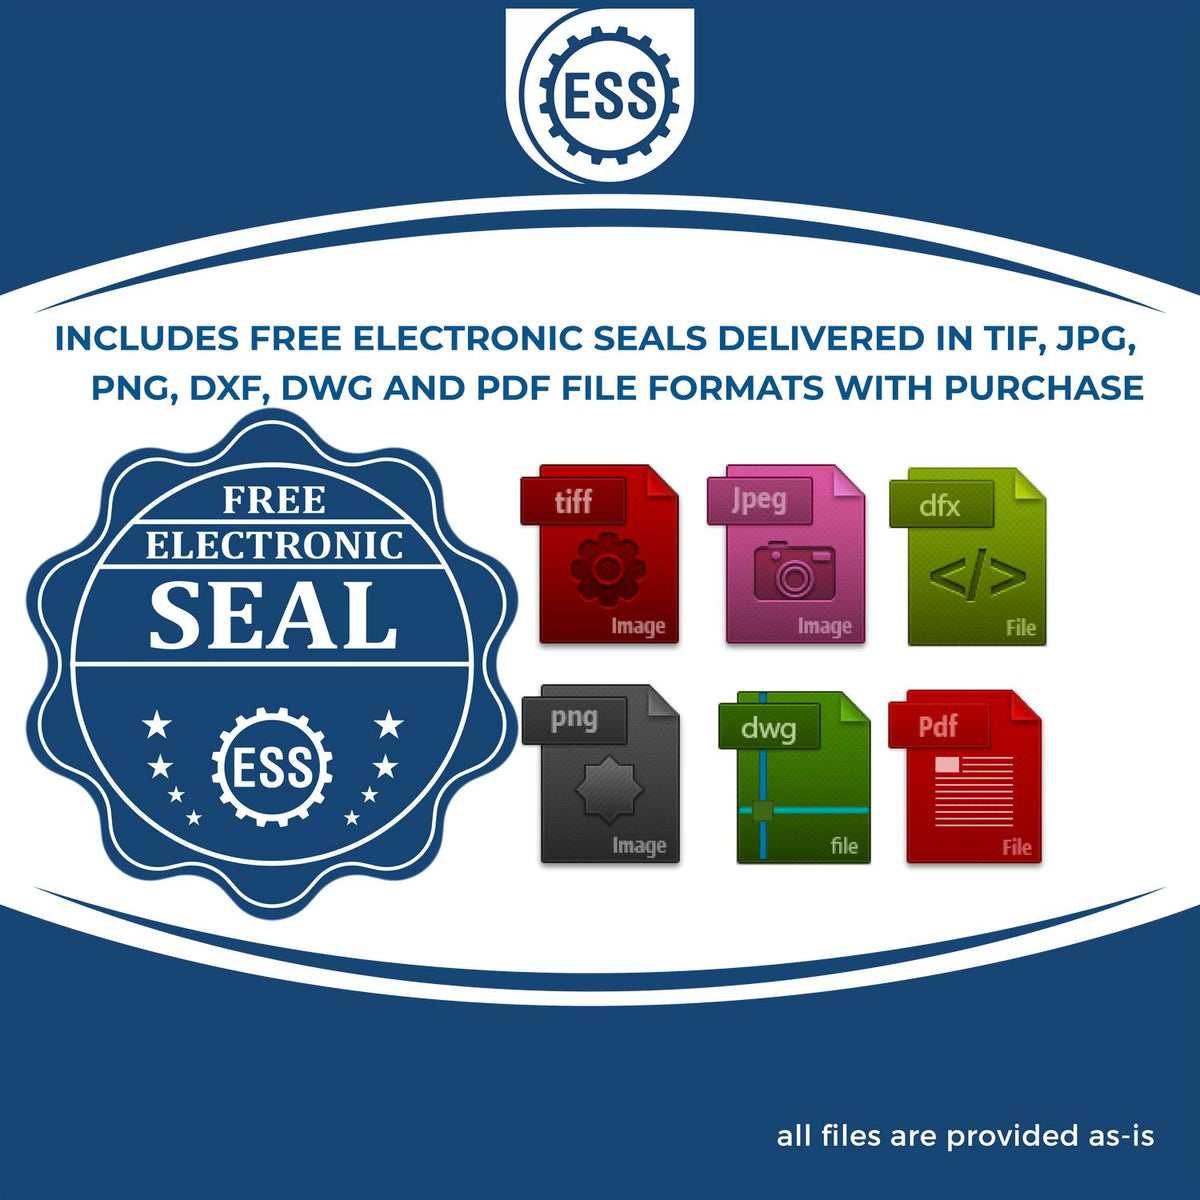 An infographic for the free electronic seal for the Self-Inking State Seal Virginia Notary Stamp illustrating the different file type icons such as DXF, DWG, TIF, JPG and PNG.